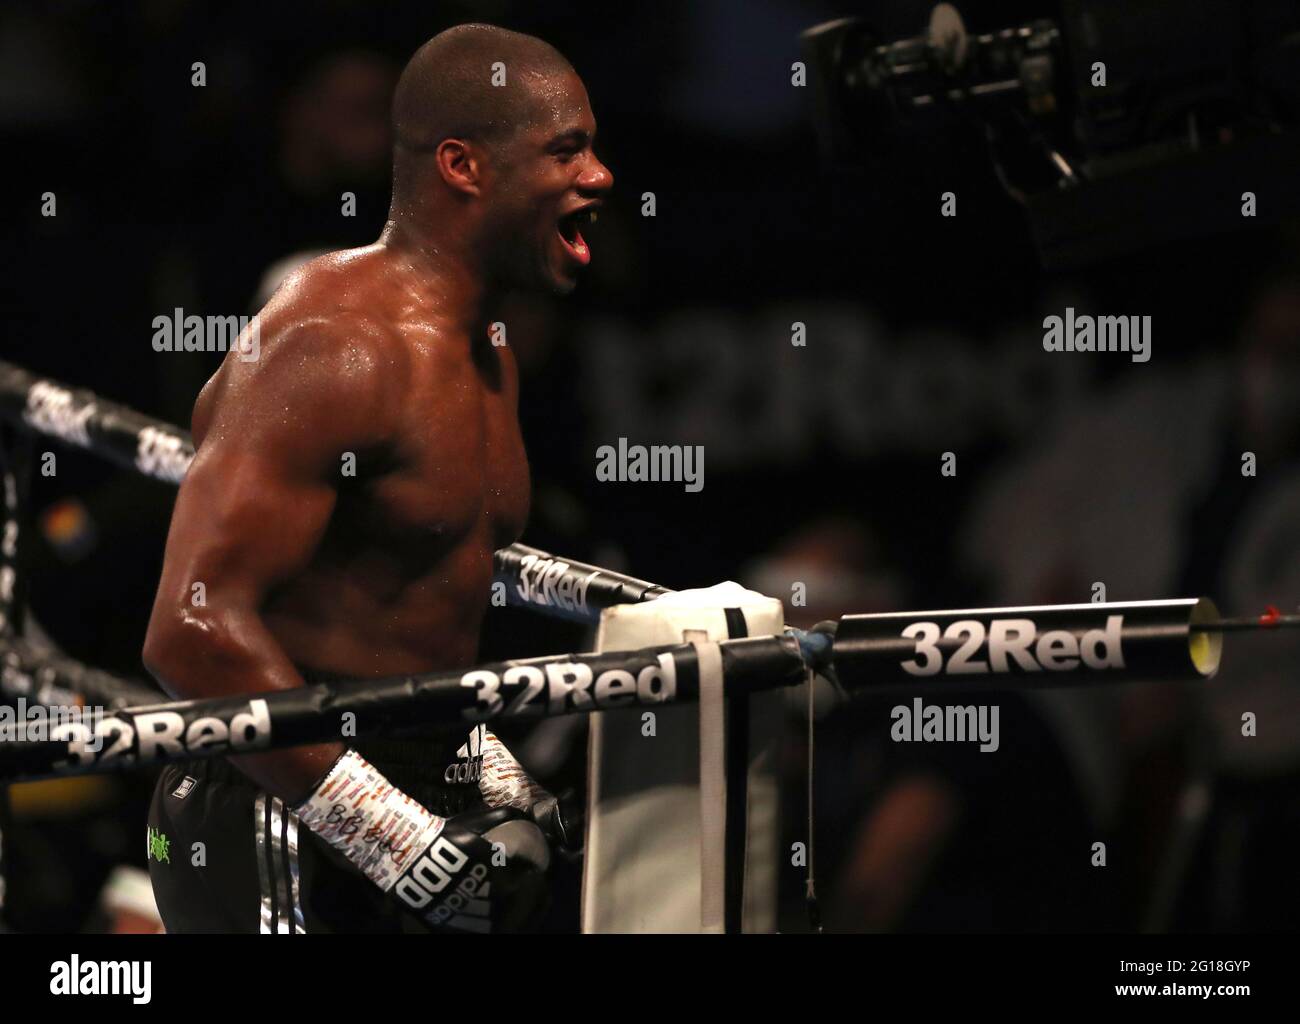 Daniel Dubois celebrates victory in the WBA Interim Heavyweight Championship during the Boxing event at the Telford International Centre, Telford. Picture date: Saturday June 5, 2021. Stock Photo